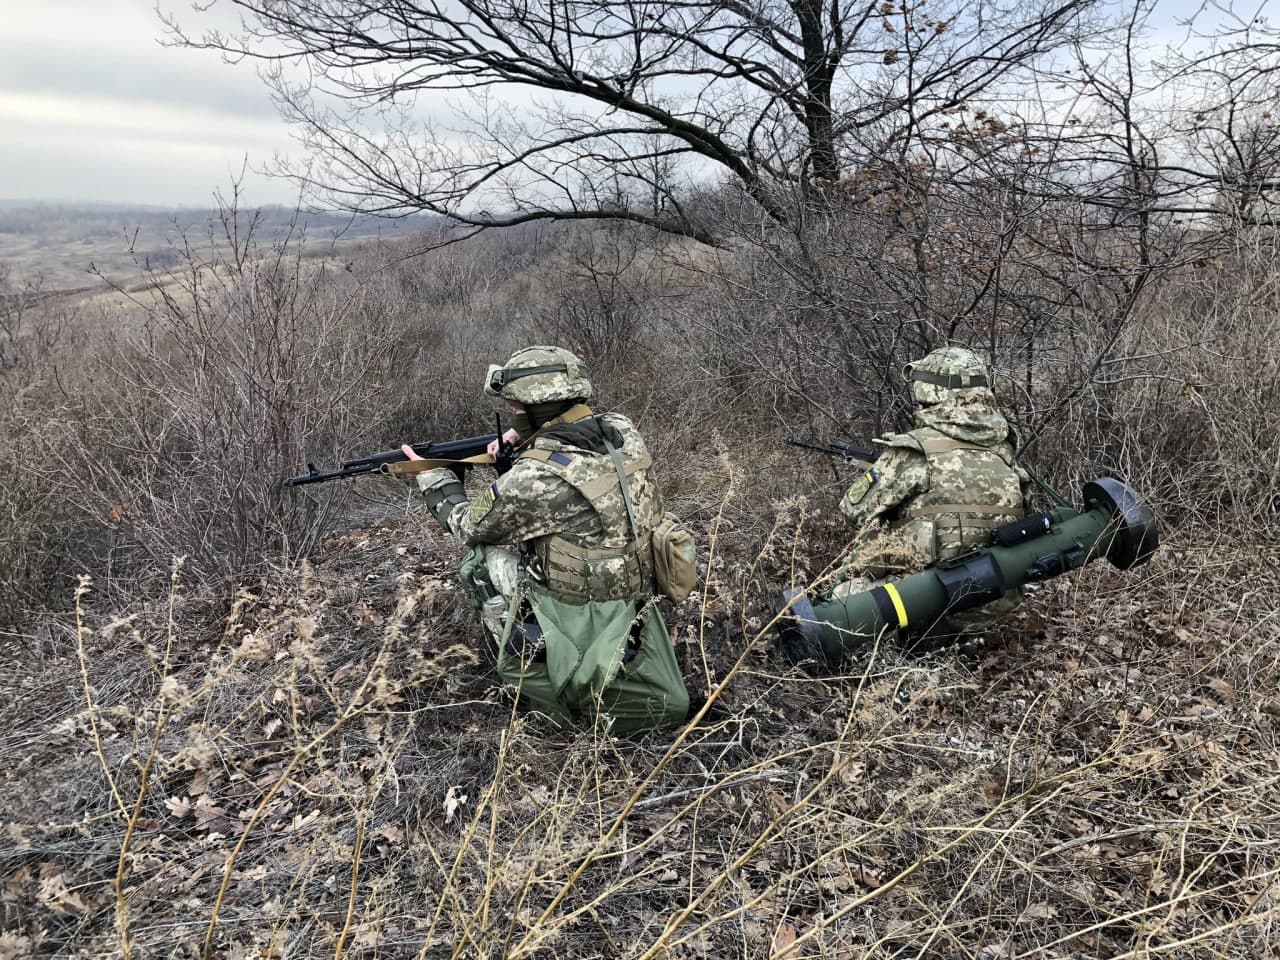 FGM-148 Javelin missile system crew on the front line, $33bn from US: Biden Asked Congress for Astronomical Sum in Funding to Aid Ukraine’s Fight Against Russia,Defense Express